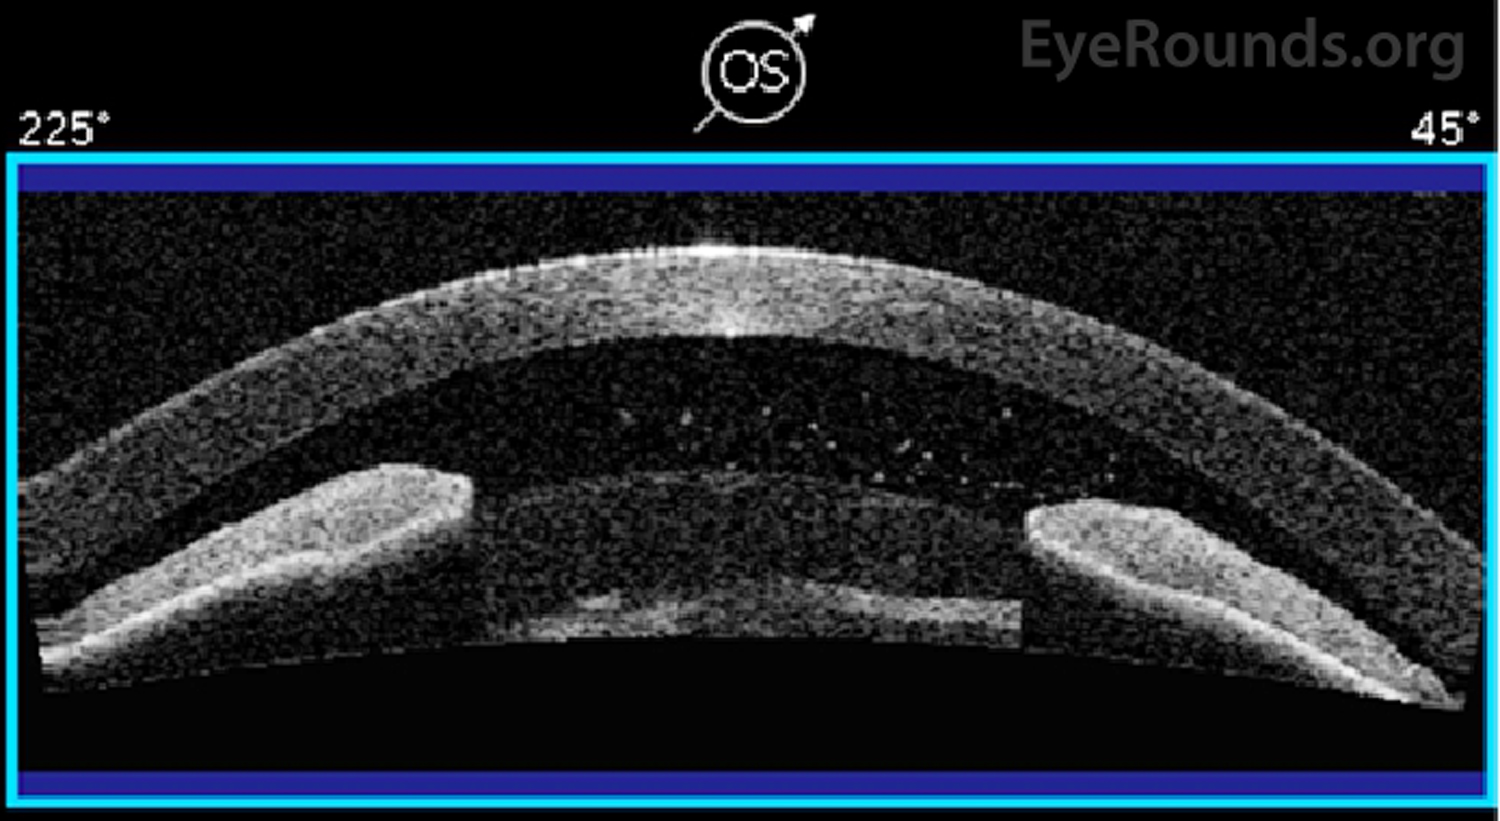 Anterior segment optical coherence tomography (AS-OCT) of the left eye